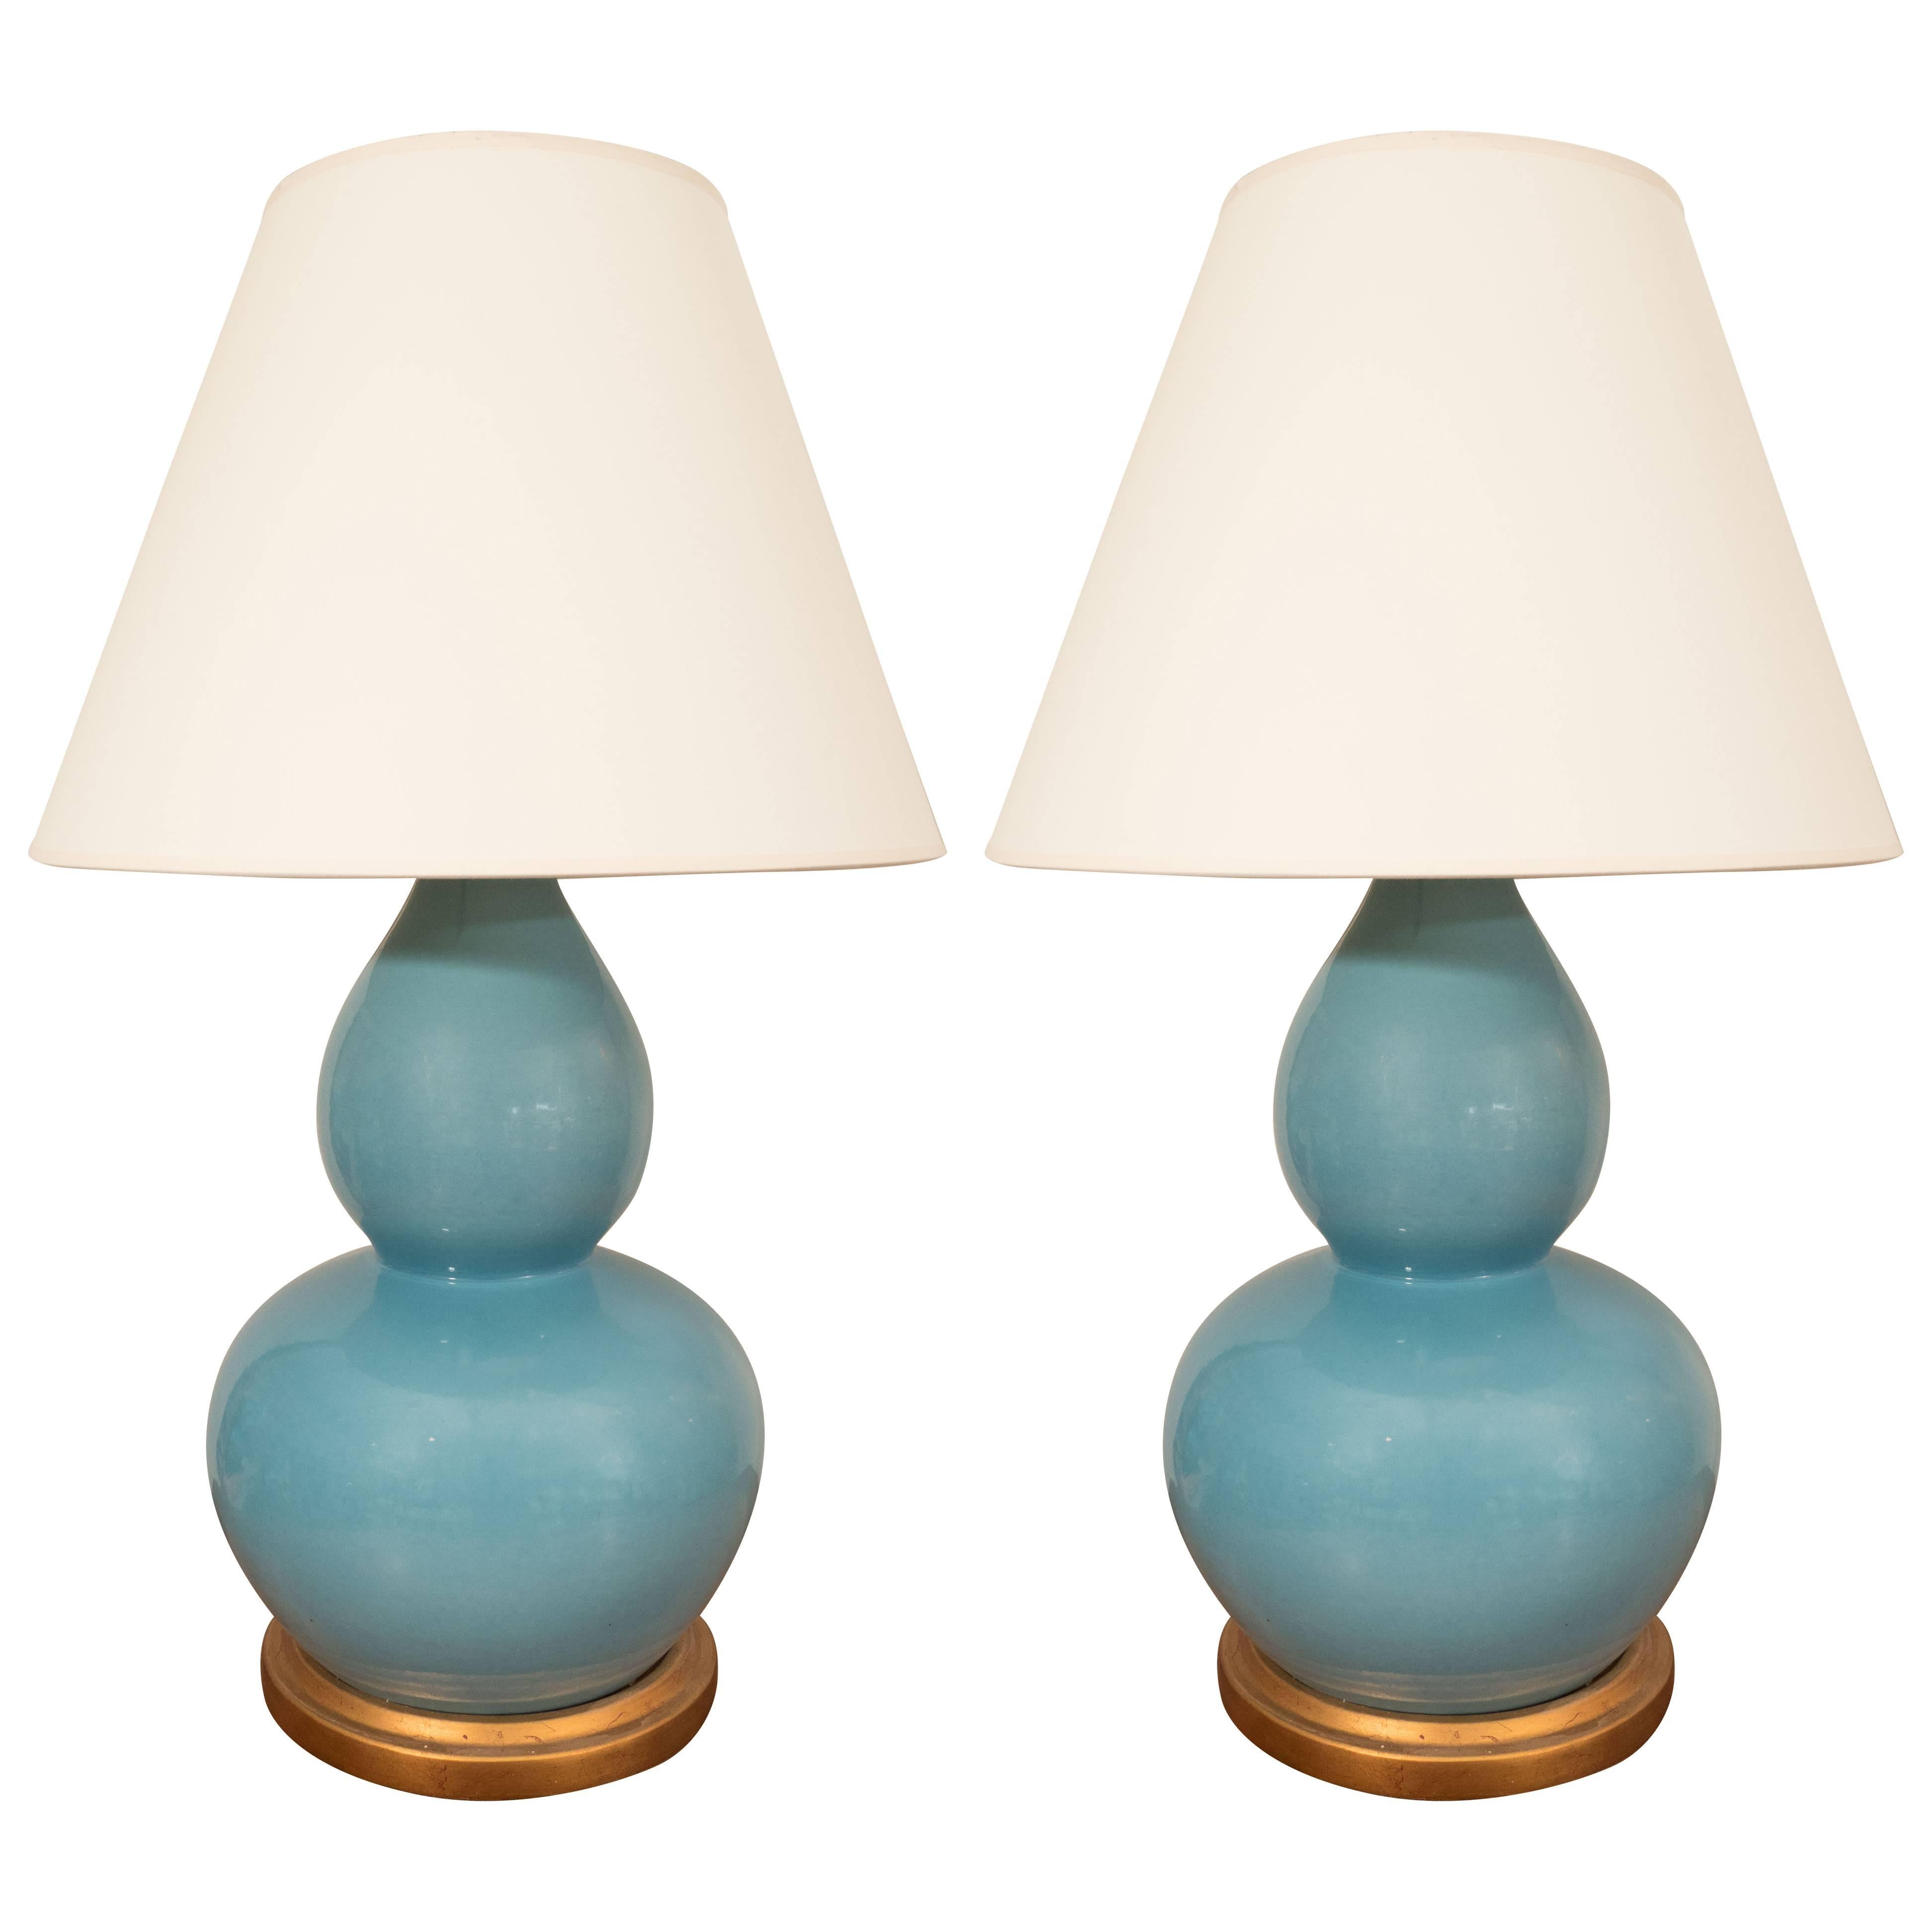 Pair of Double Gourd Ceramic Lamps